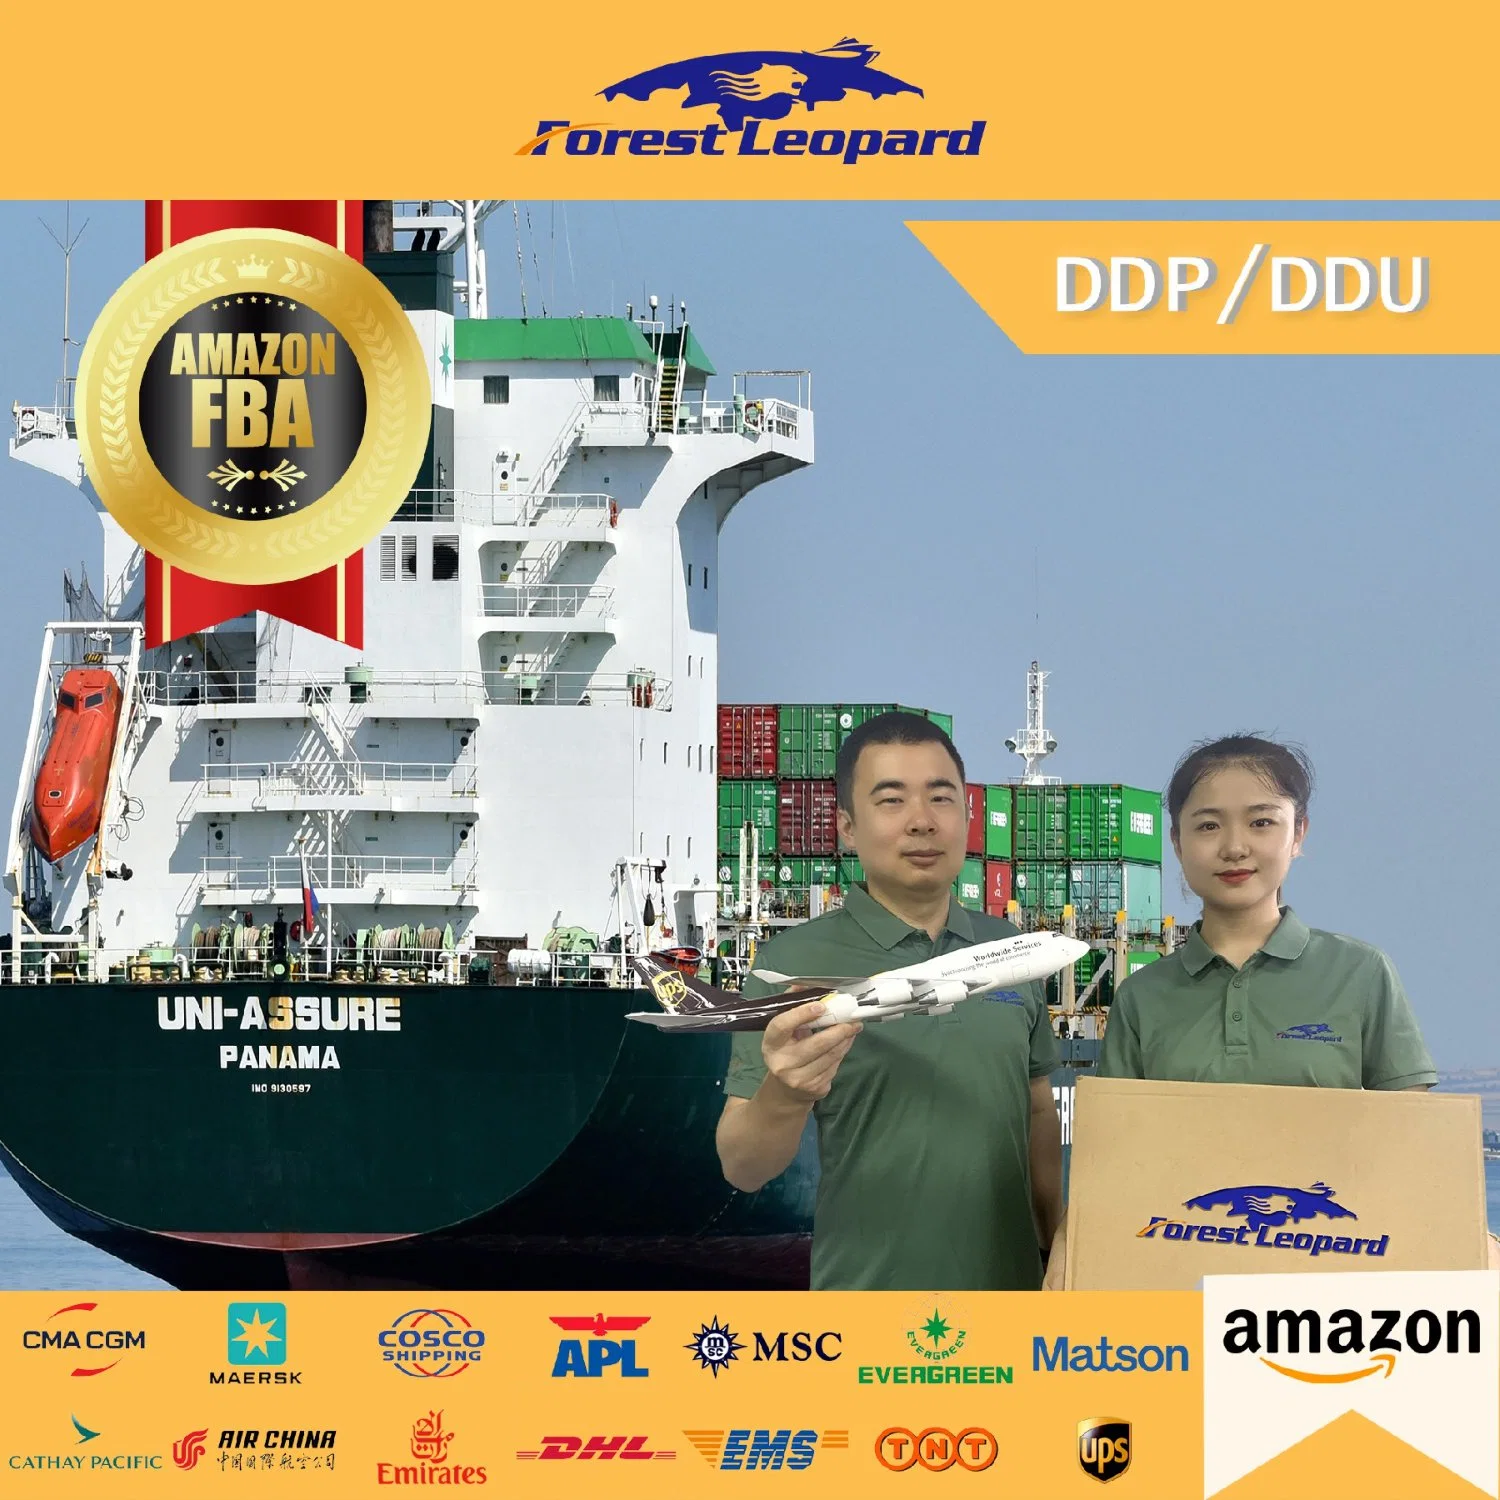 Cheap DDP Air/Sea Cargo Services Shipping Rates Fba Amazon Freight Forwarder From China to USA/Europe/UK/Canada Logistics Agent